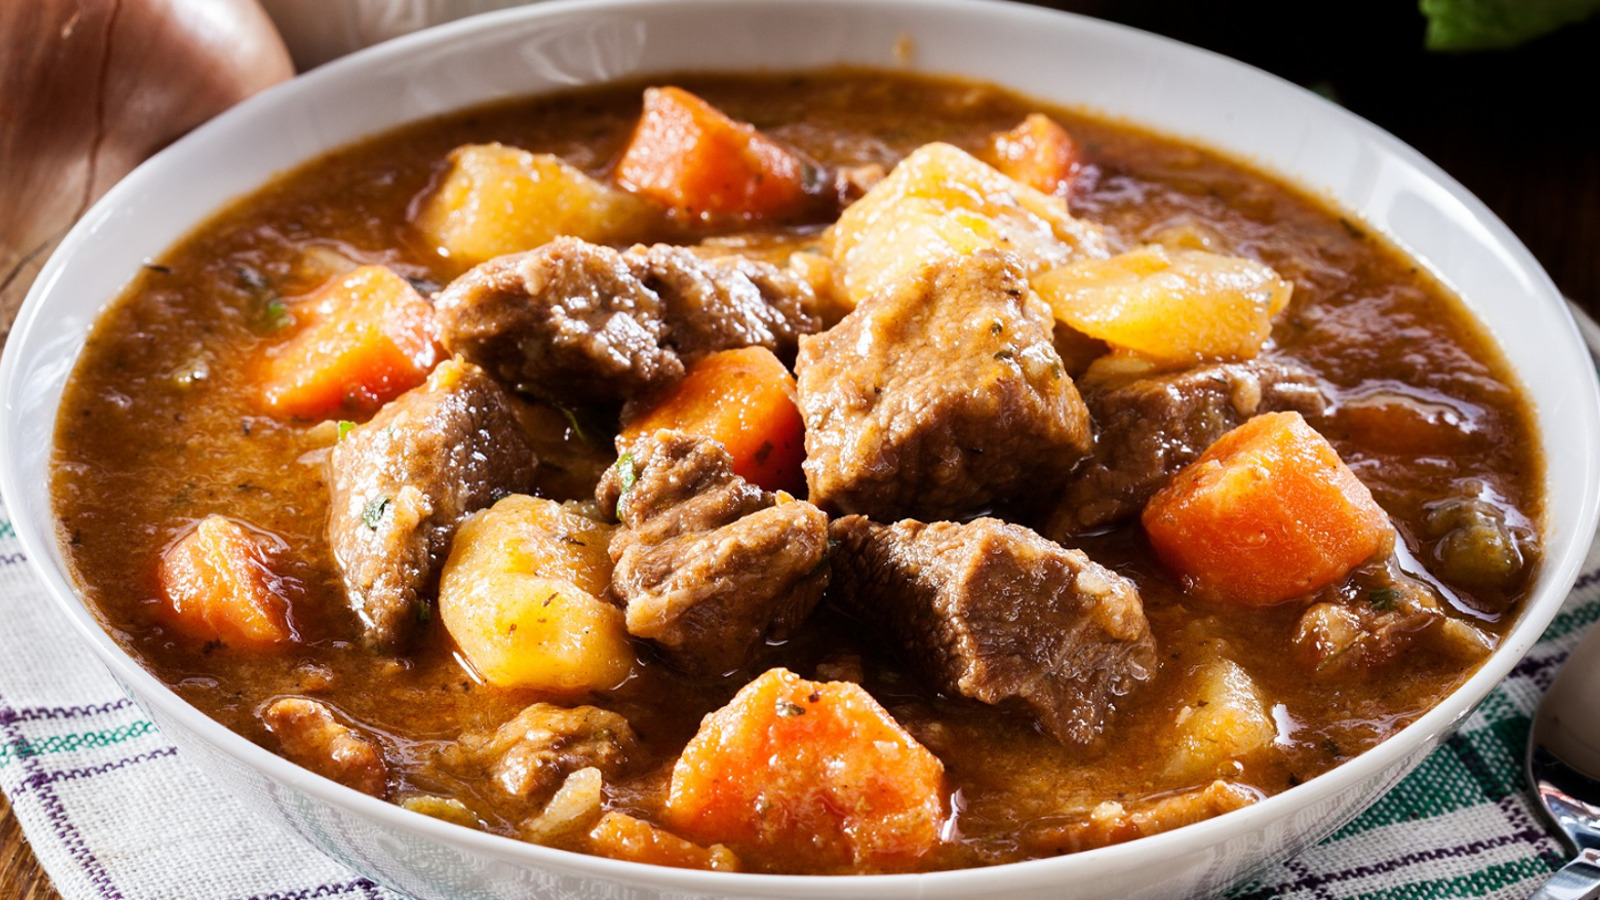 Add Beer To Your Next Beef Stew For Extra Hearty Flavor